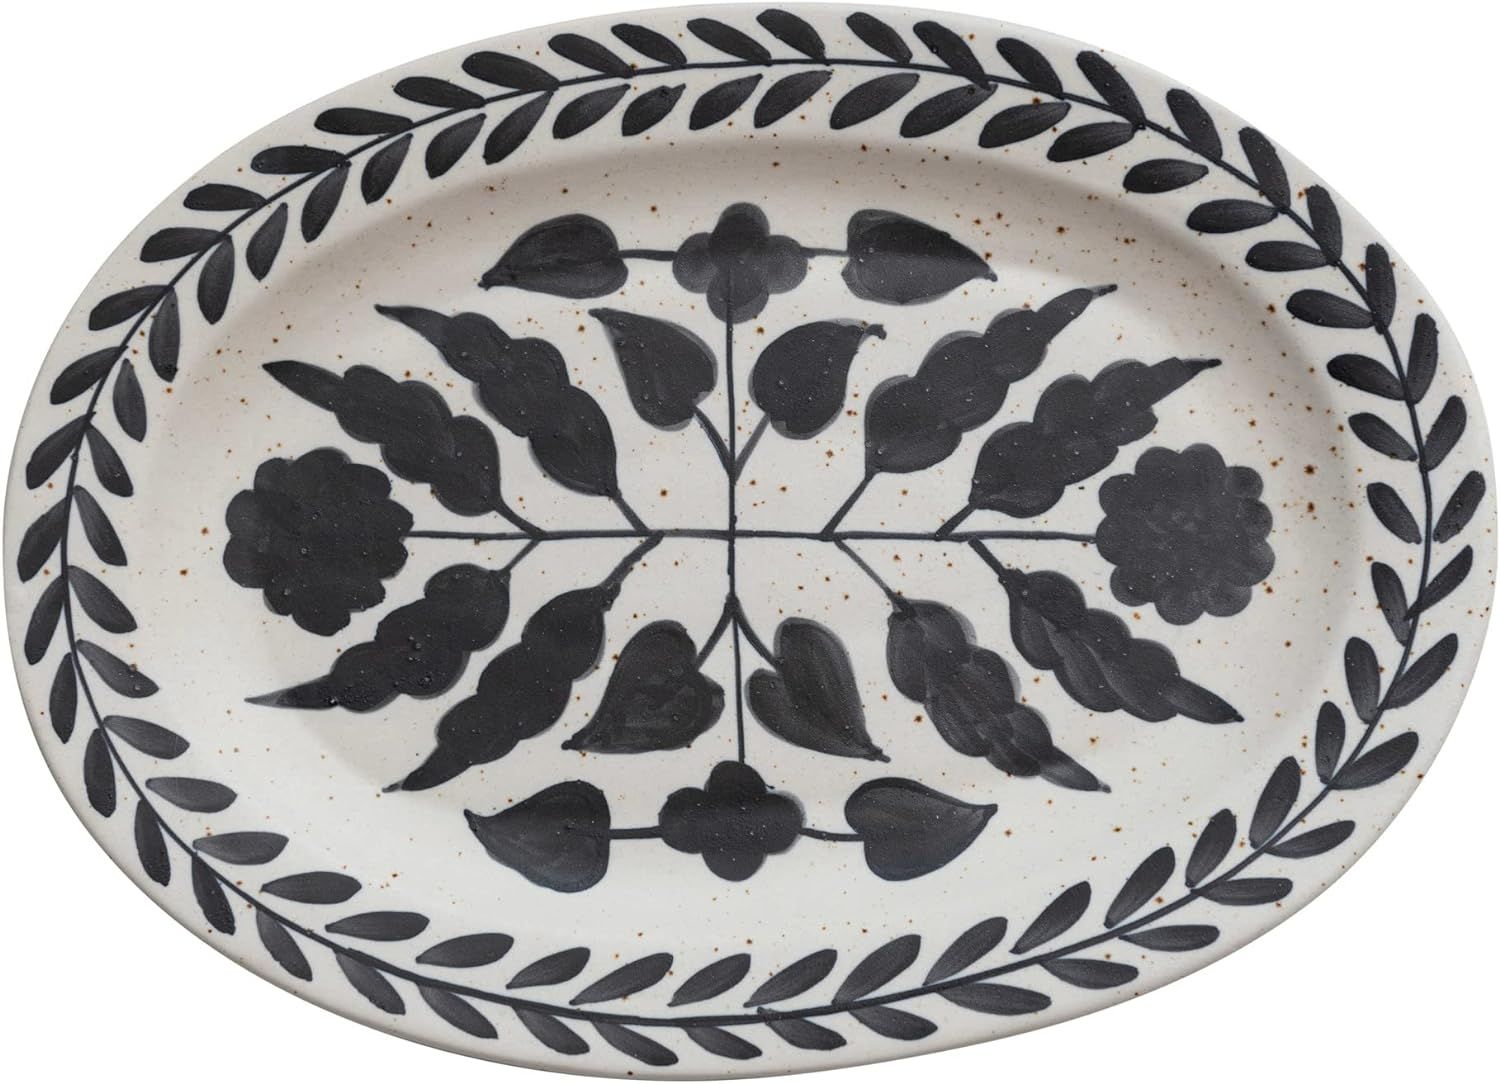 Creative Co-Op Hand Painted Stoneware Floral Design, Black and White Platter | Amazon (US)